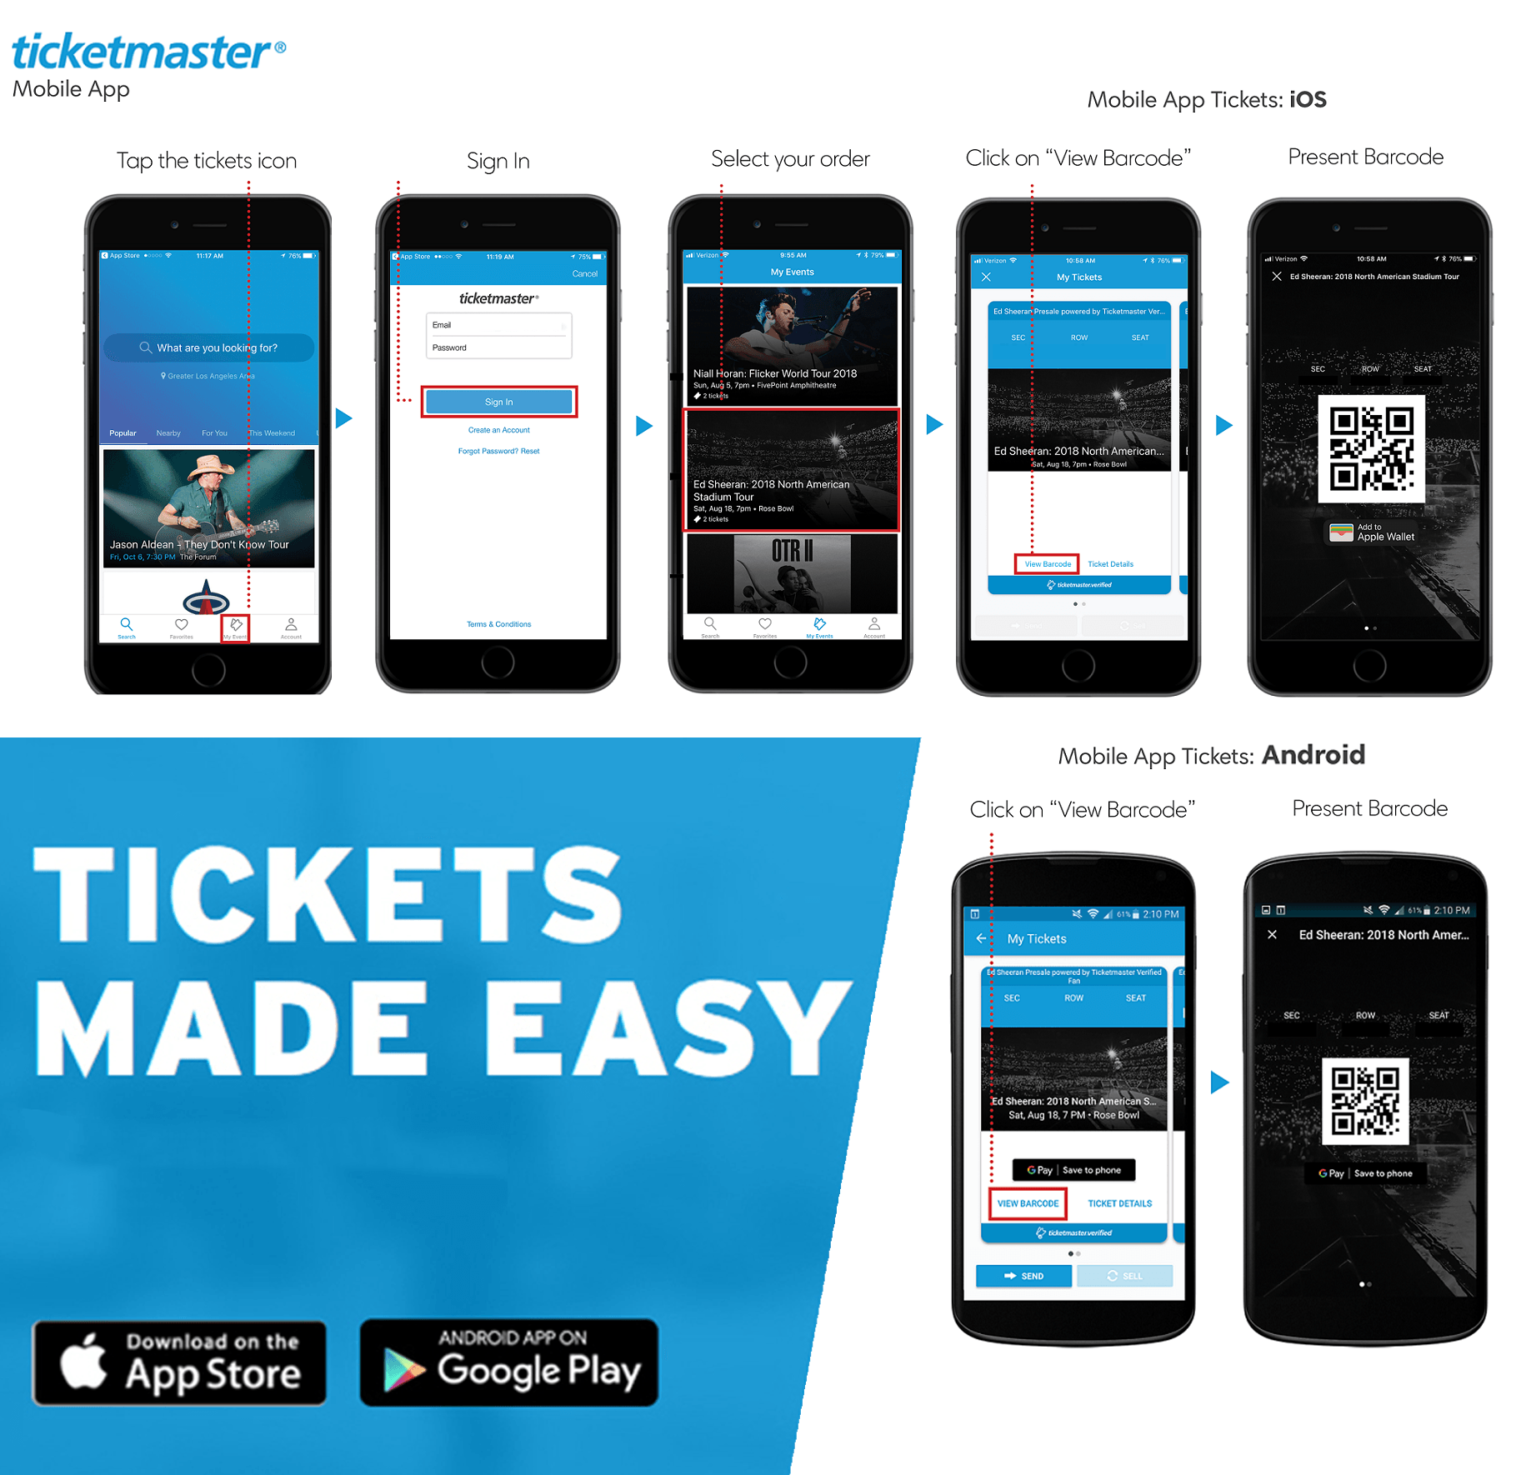 How To Access Your TM APP Mobile Tickets